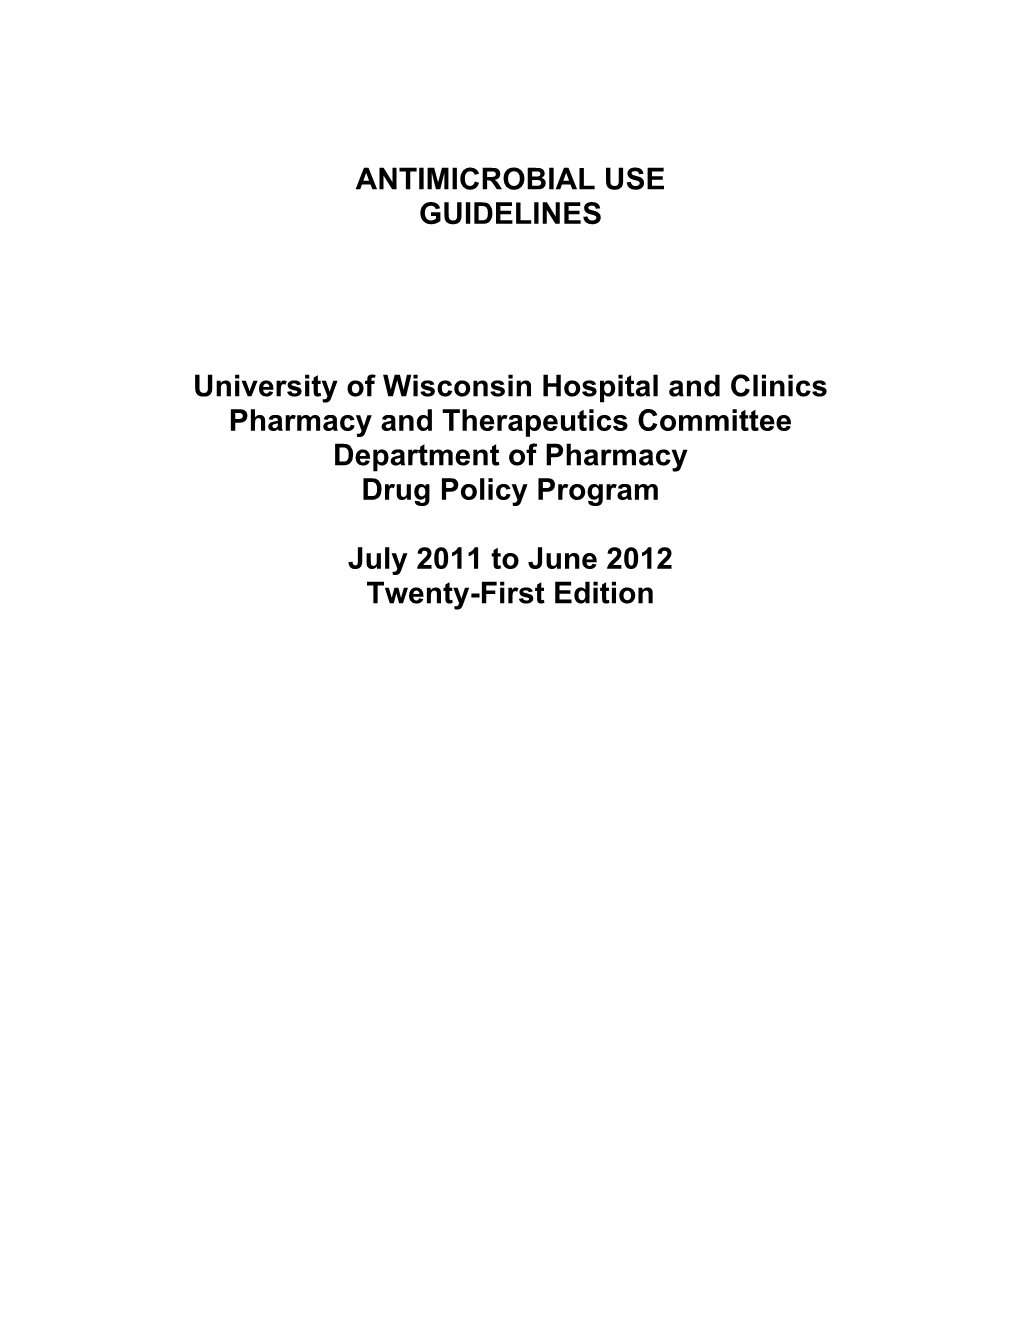 Antimicrobial Use Guidelines